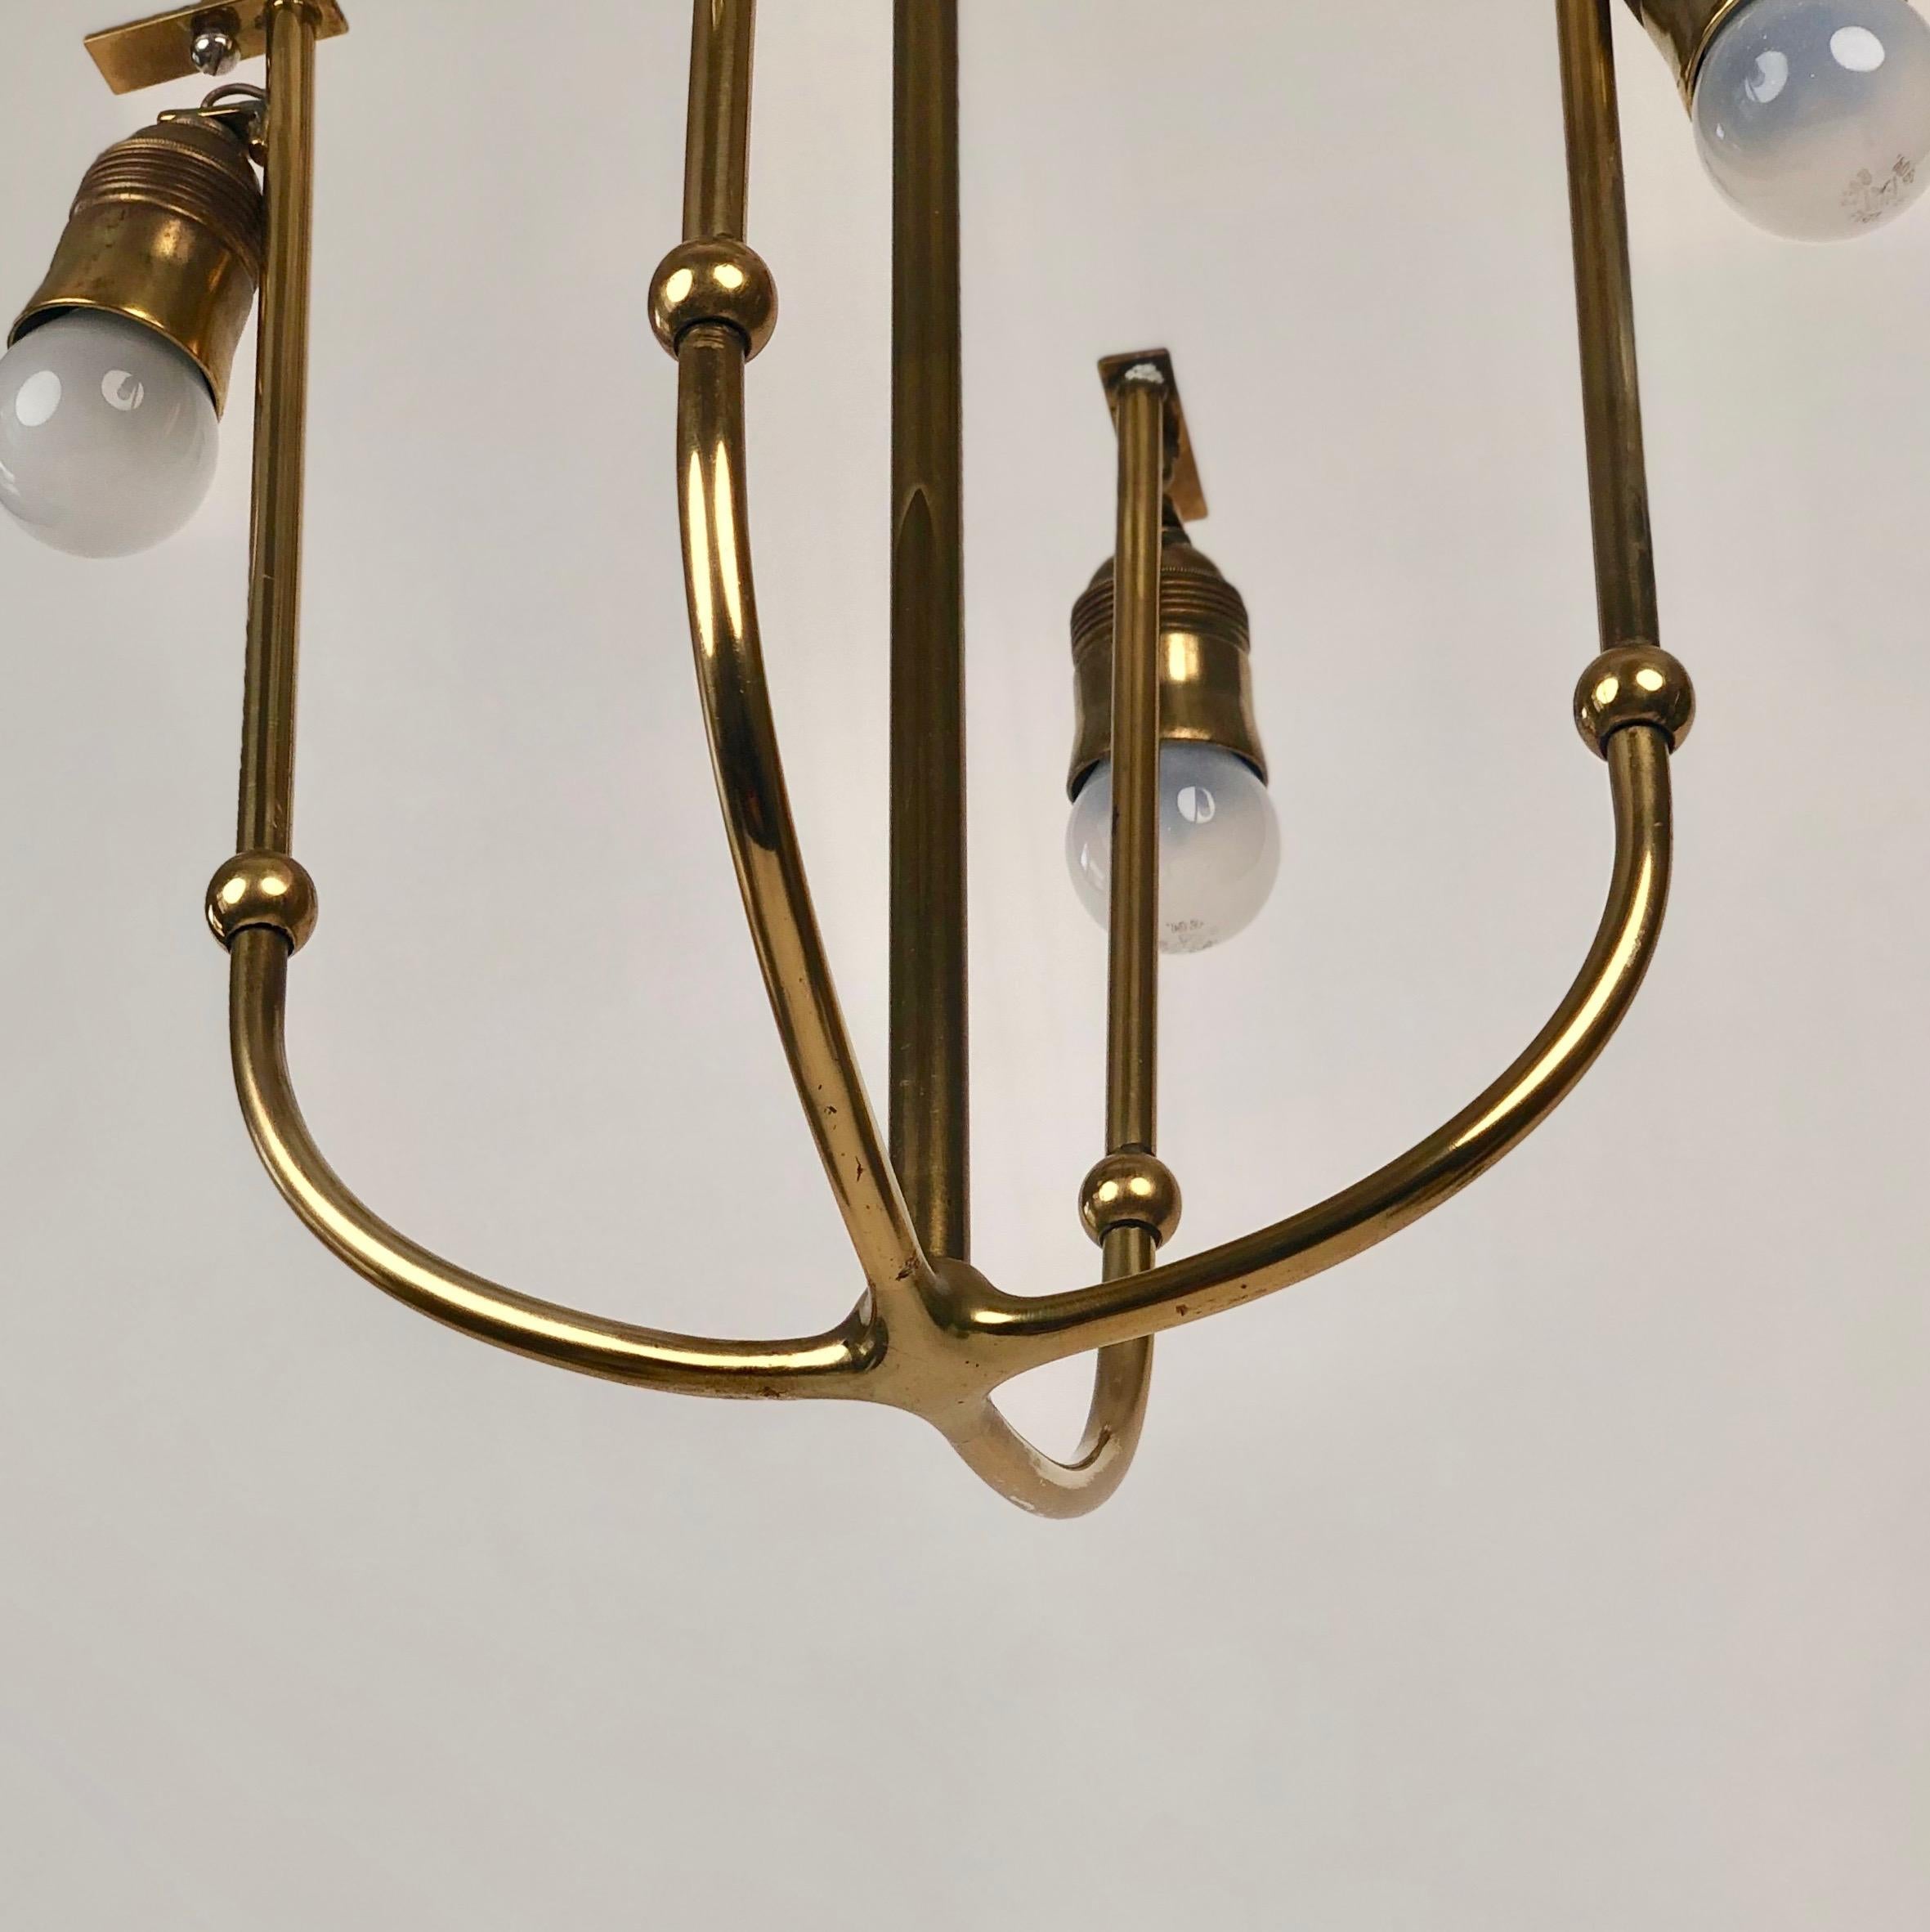 Four Arm Chandelier in Brass with Silk Shades , 1930's, Austria For Sale 7